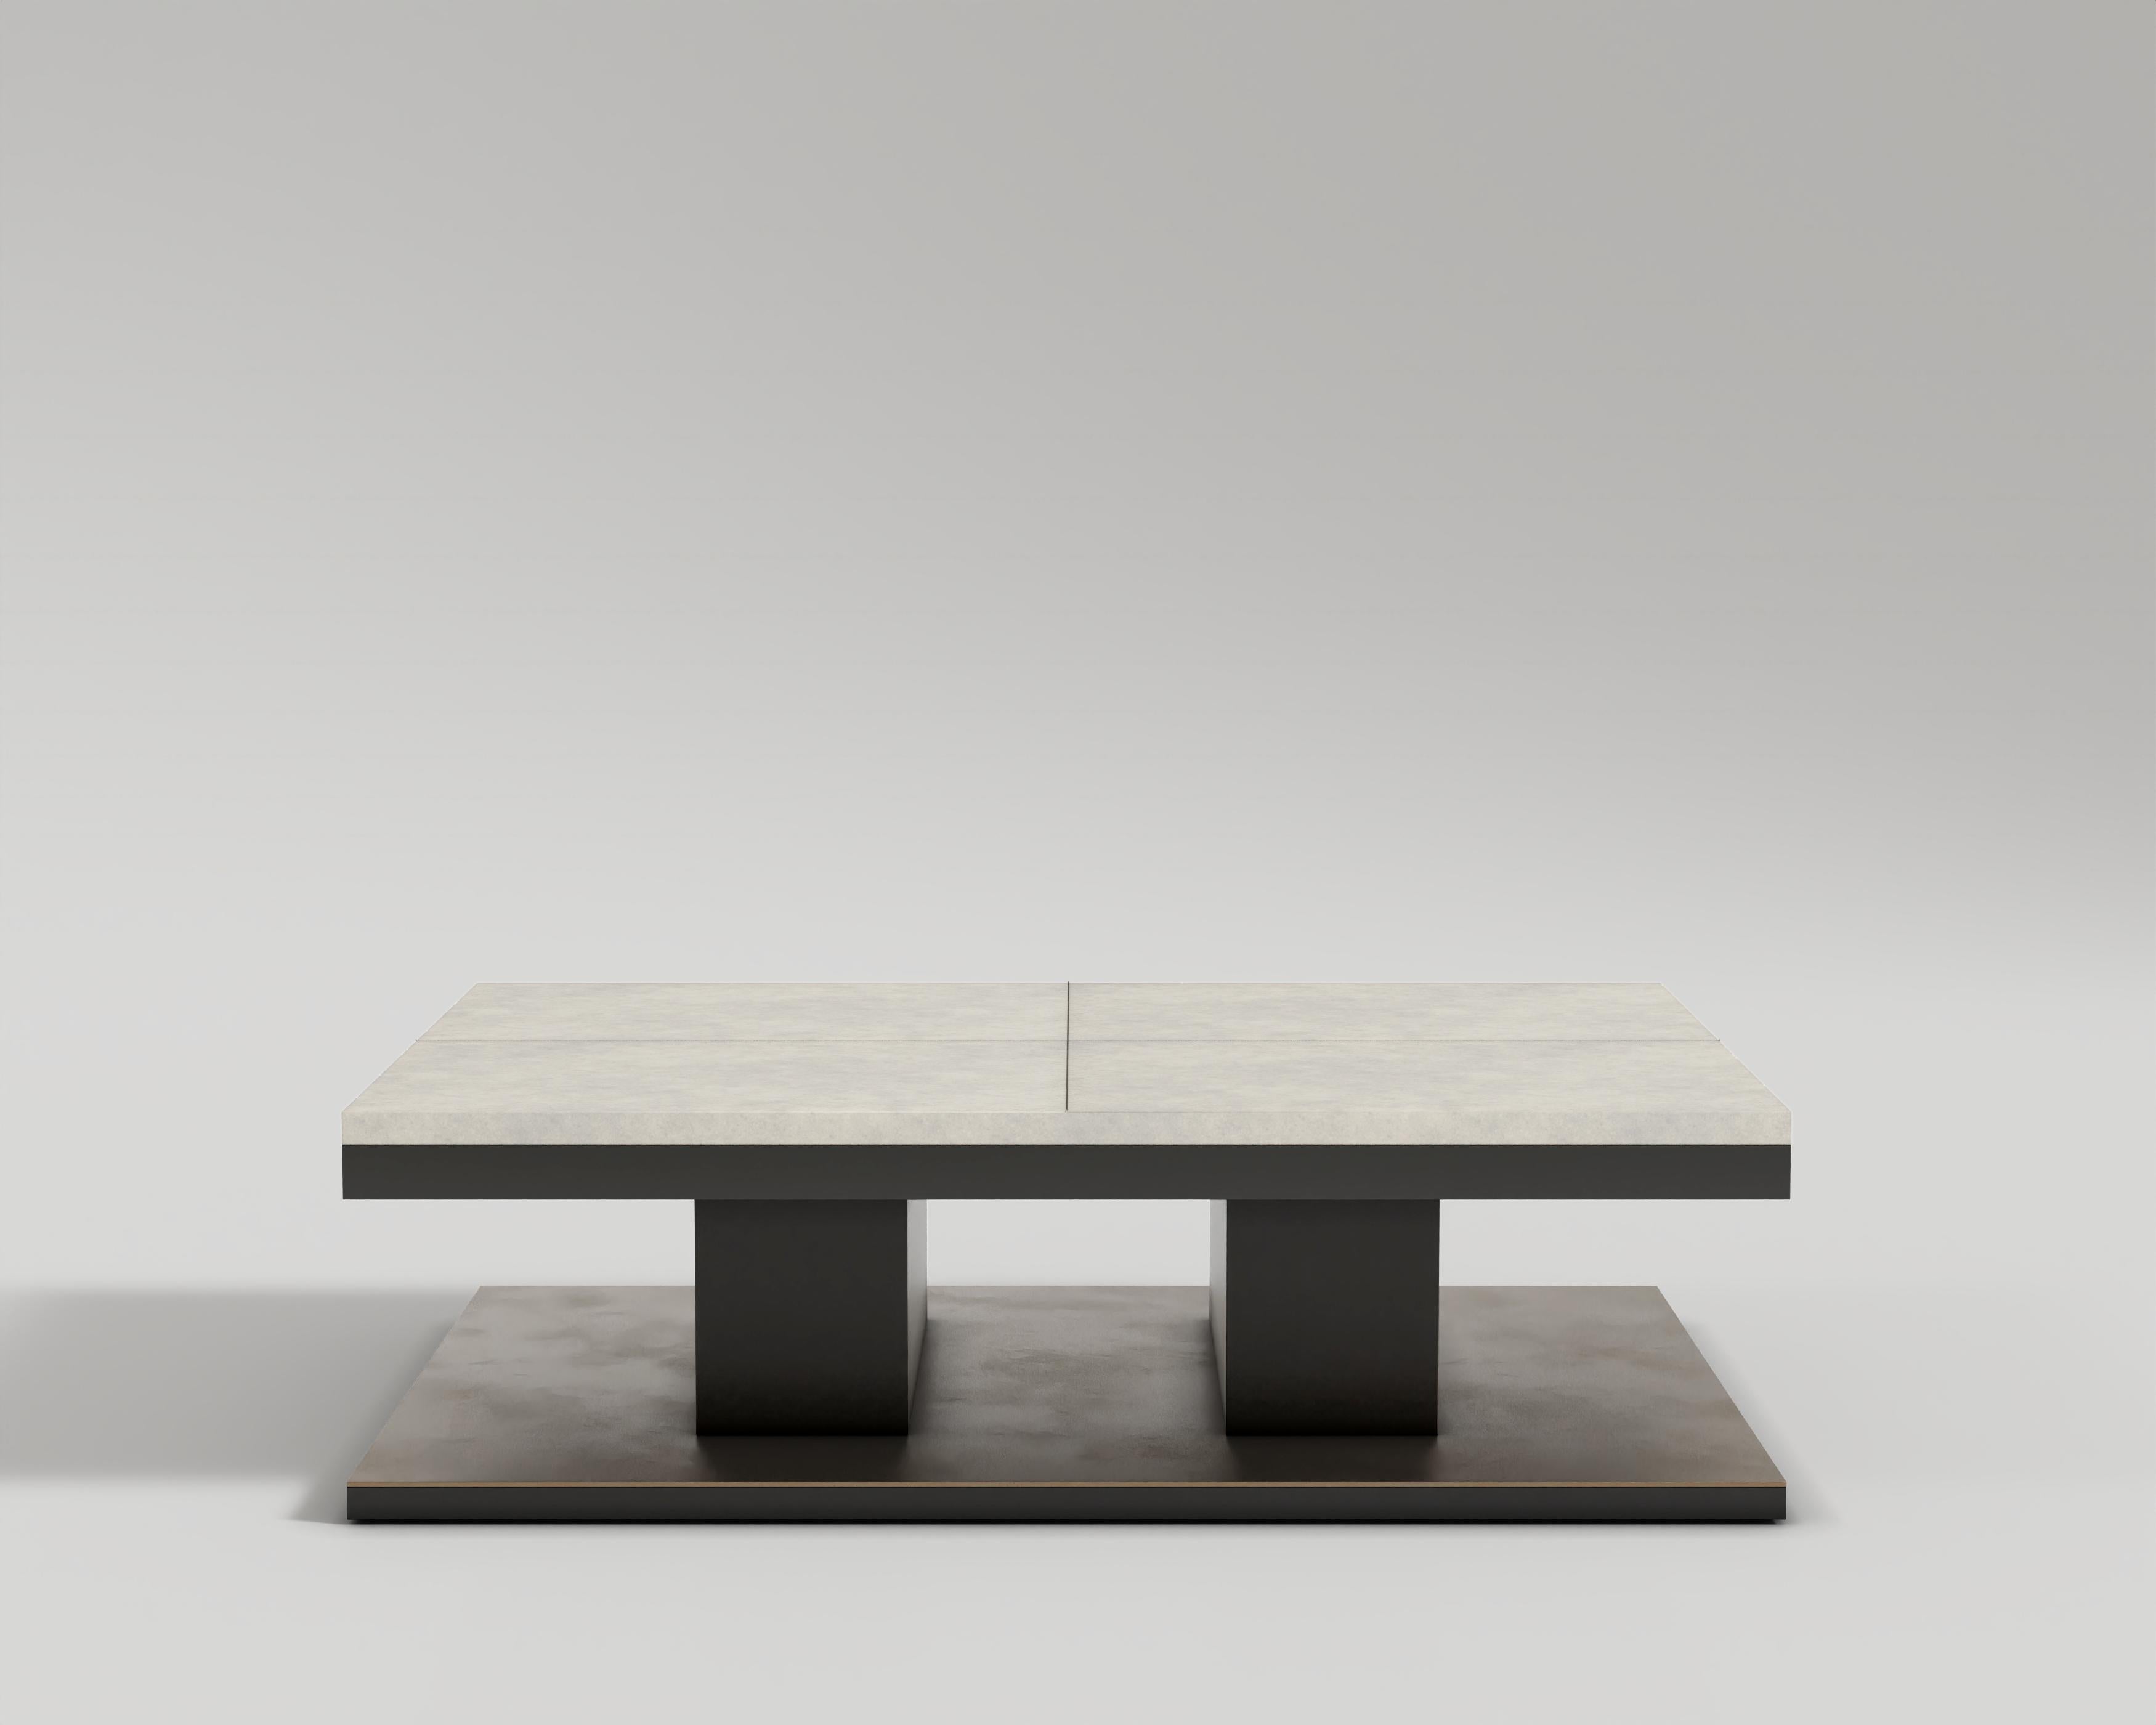 Rec Coffee Table
The Rec coffee table showcases a striking design with a matte black metal body and a tabletop crafted from luxurious white goat skin. The matte black metal exudes a modern and edgy vibe, providing a sturdy and durable foundation for